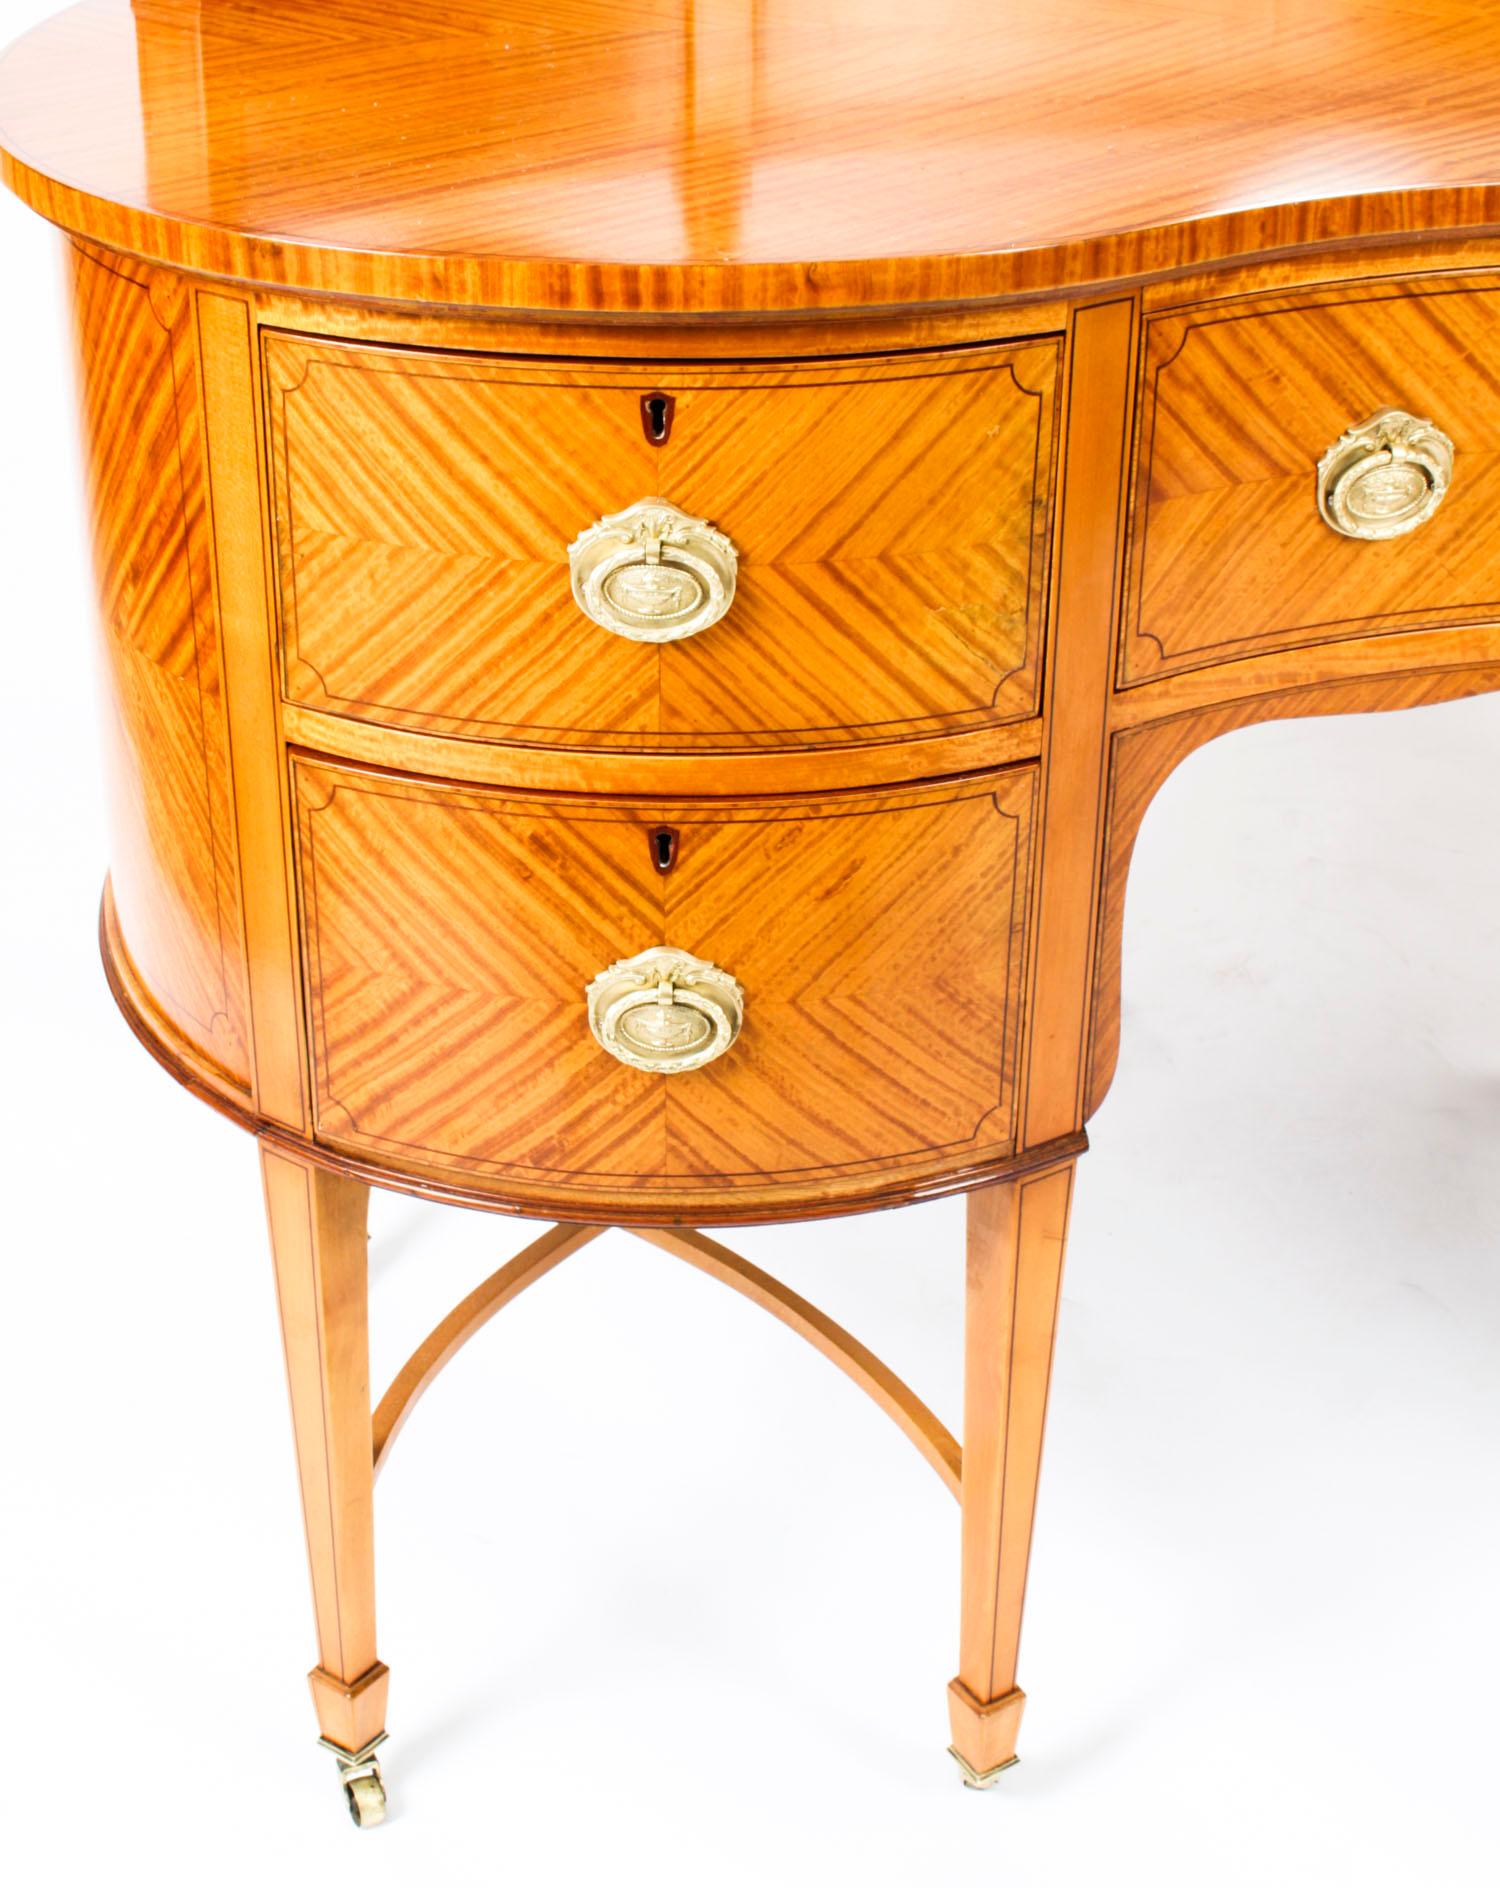 Antique Satinwood Kidney Dressing Table Attributed to Maple & Co, 19th Century 3